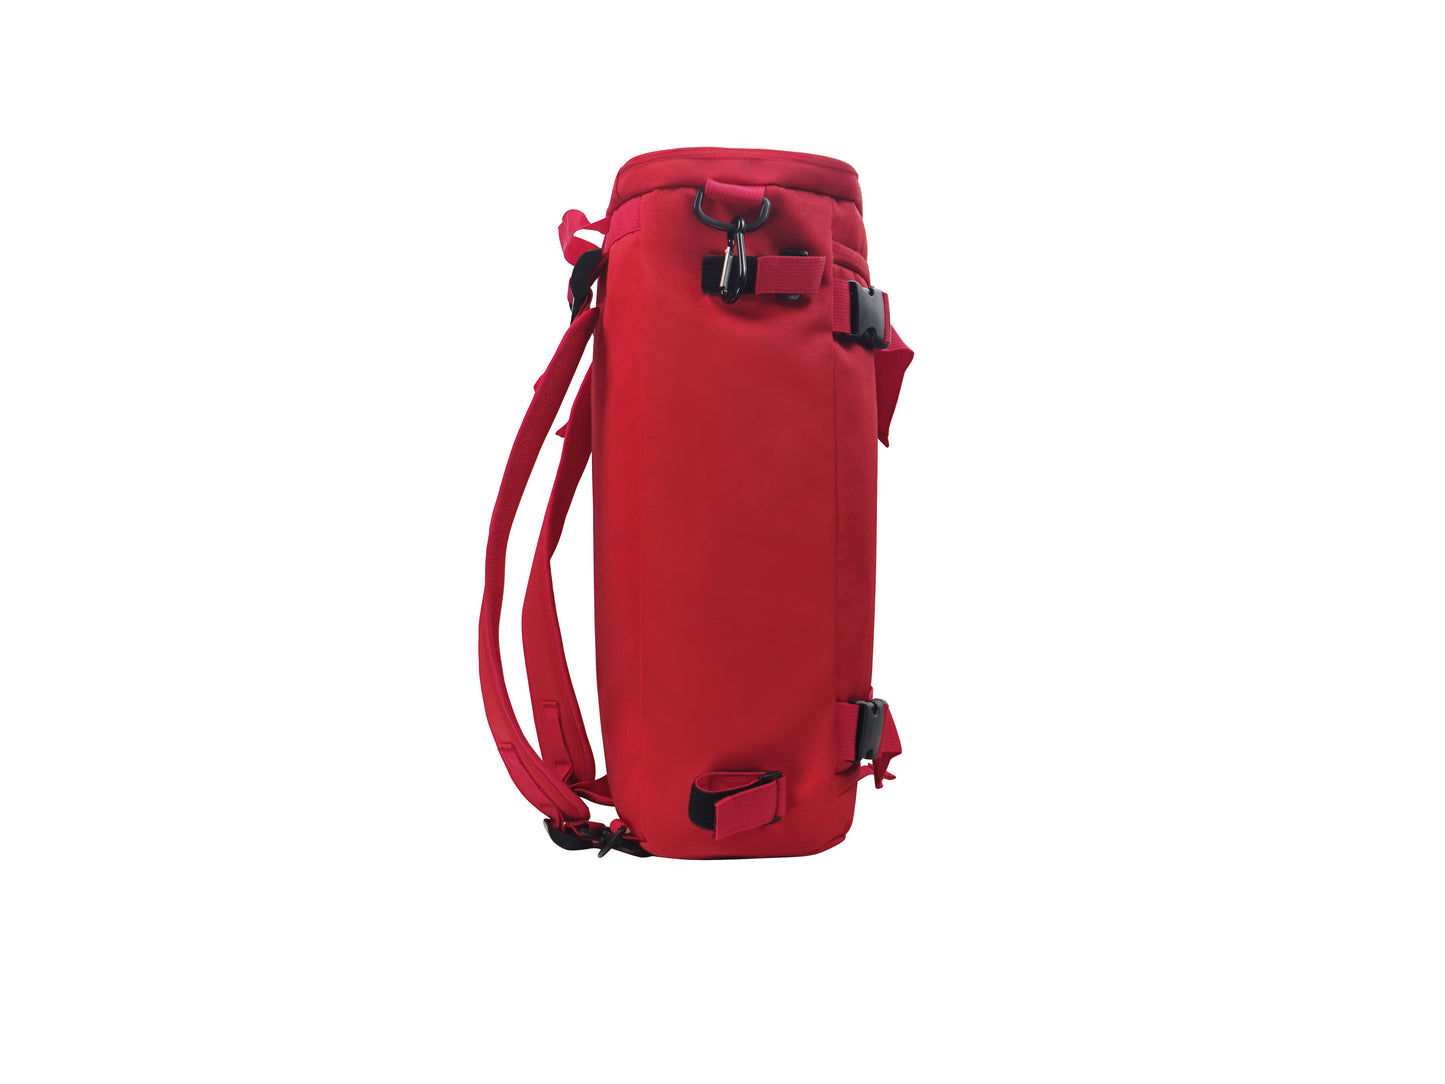 Cambridge City HC - Accra Backpack - Red